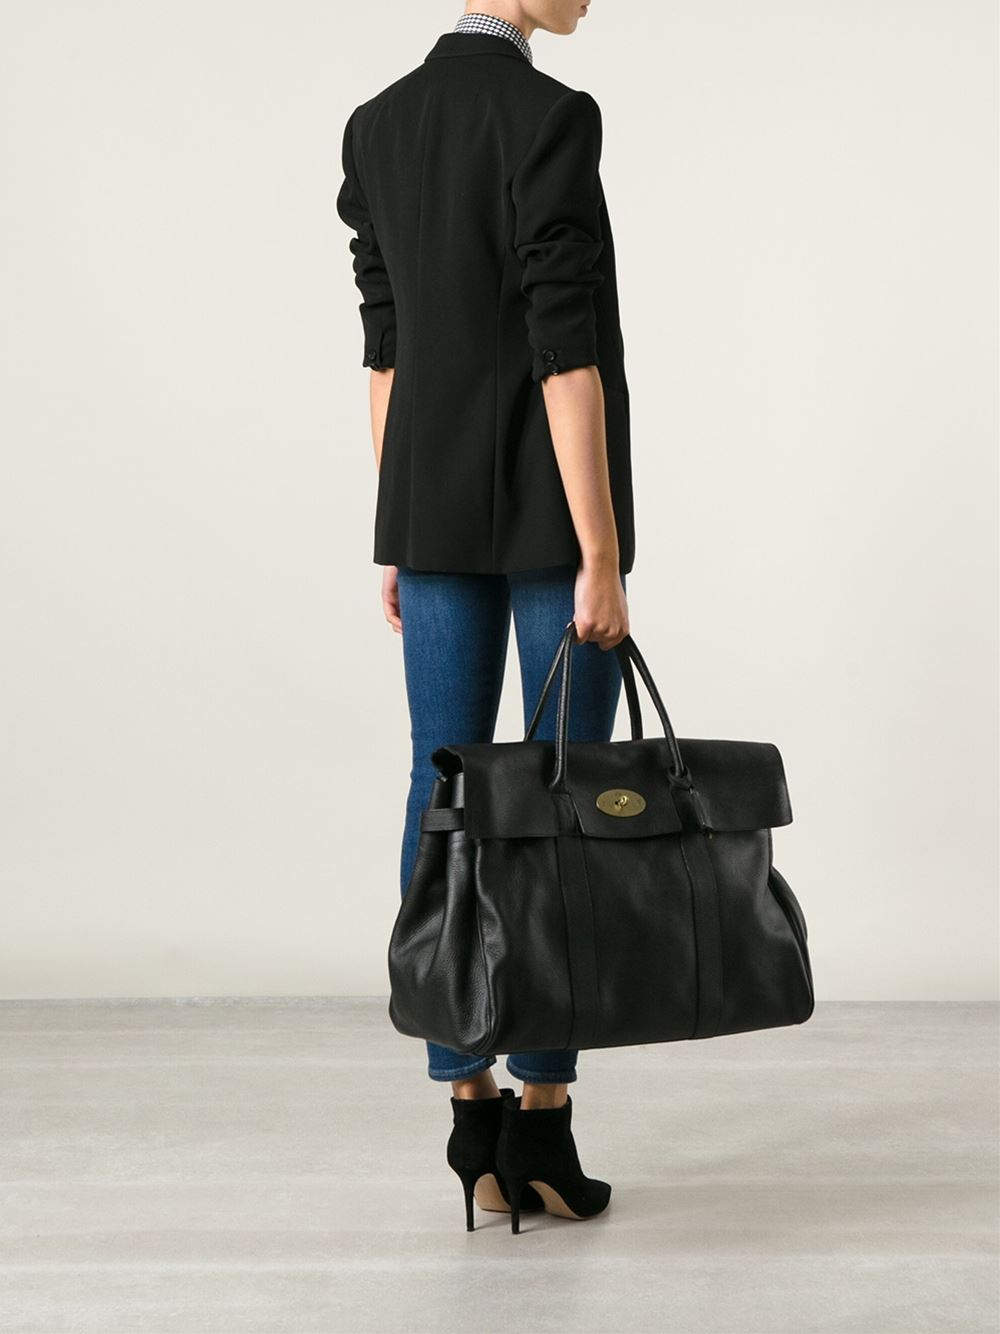 Mulberry Oversized Bayswater Bag in Black | Lyst